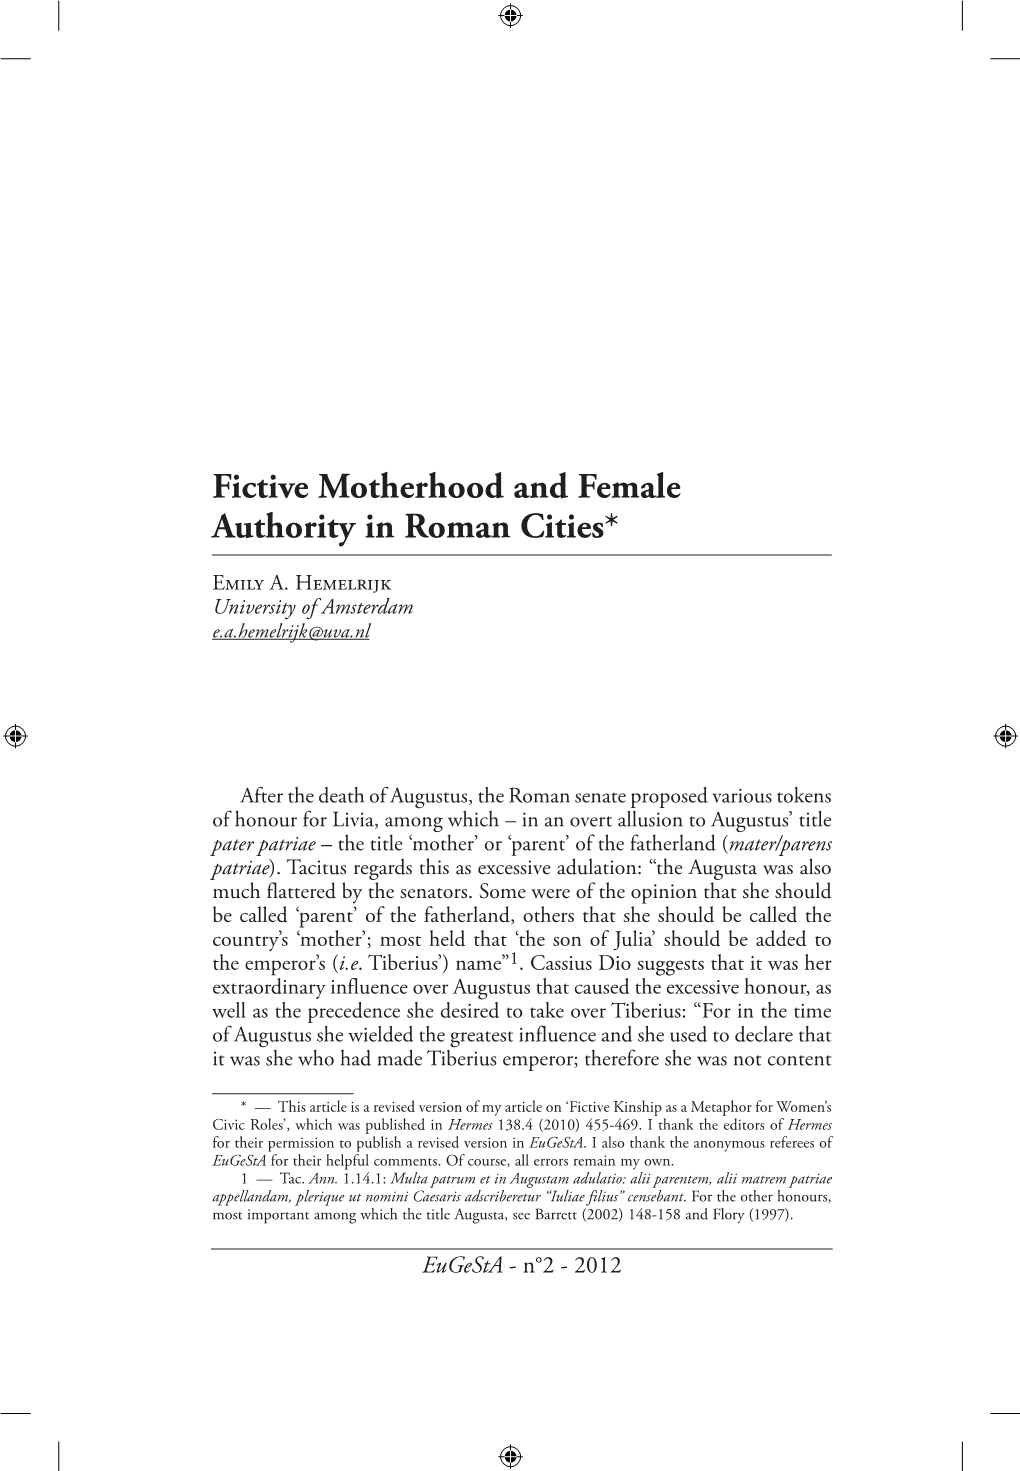 Fictive Motherhood and Female Authority in Roman Cities*